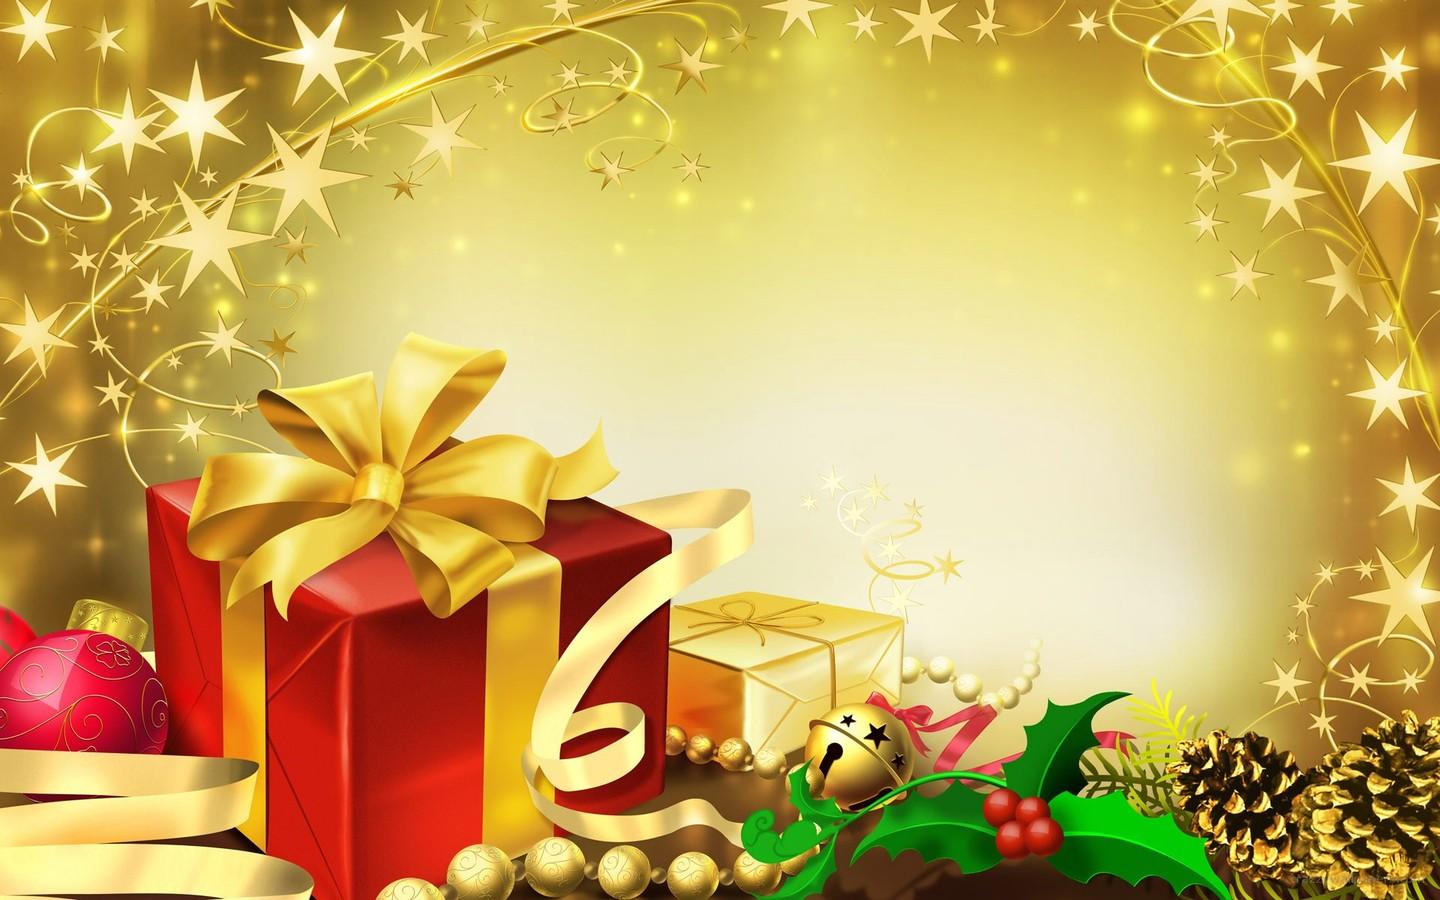 Christmas theme wallpaper  Android Apps on Google Play